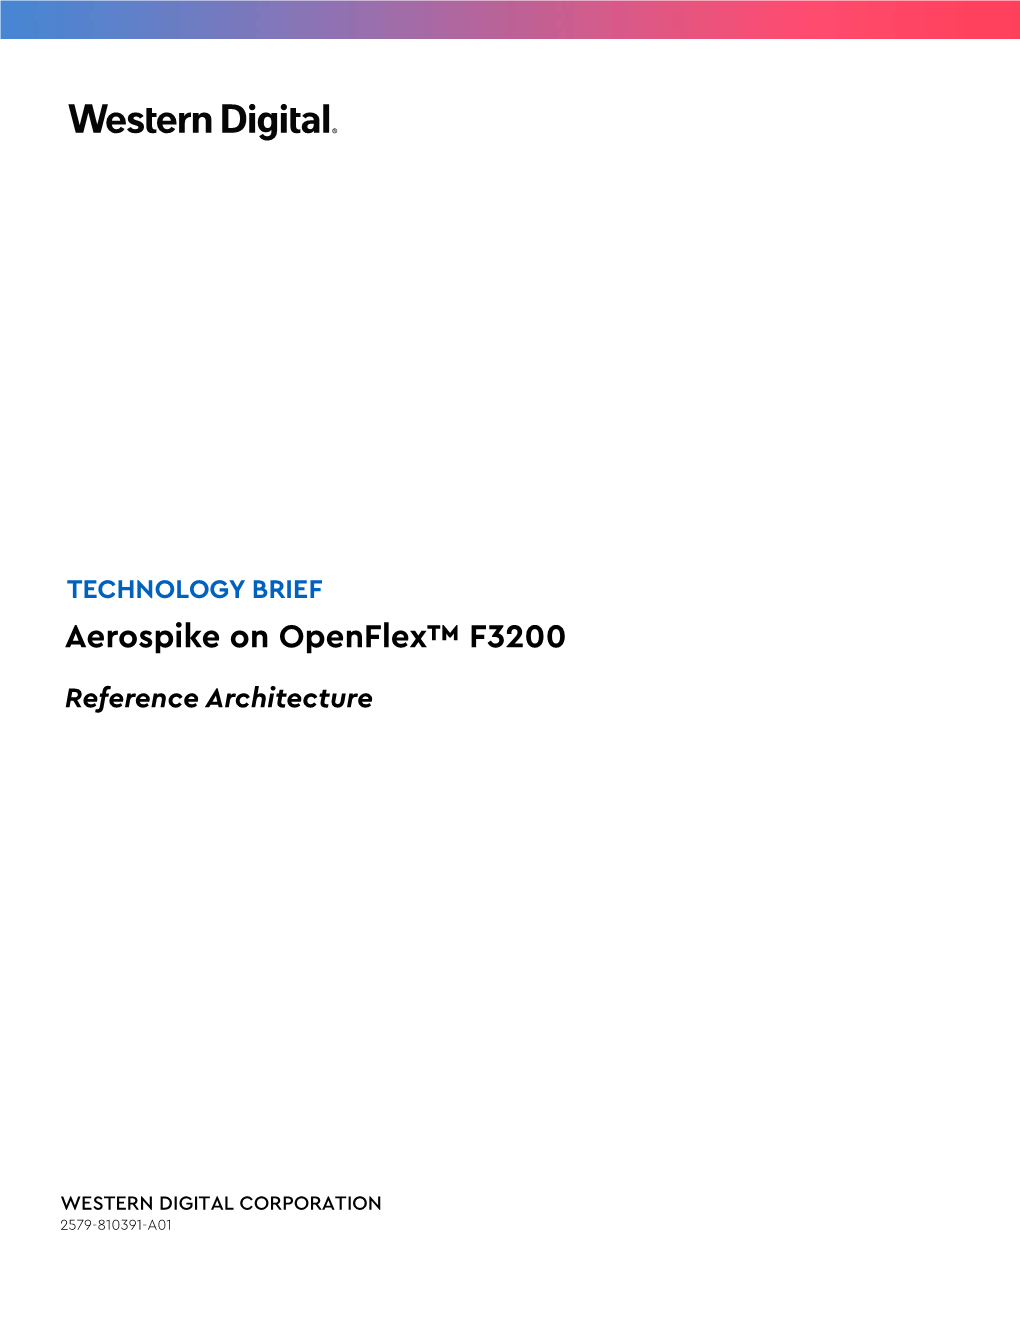 Aerospike on Openflex F3200 Reference